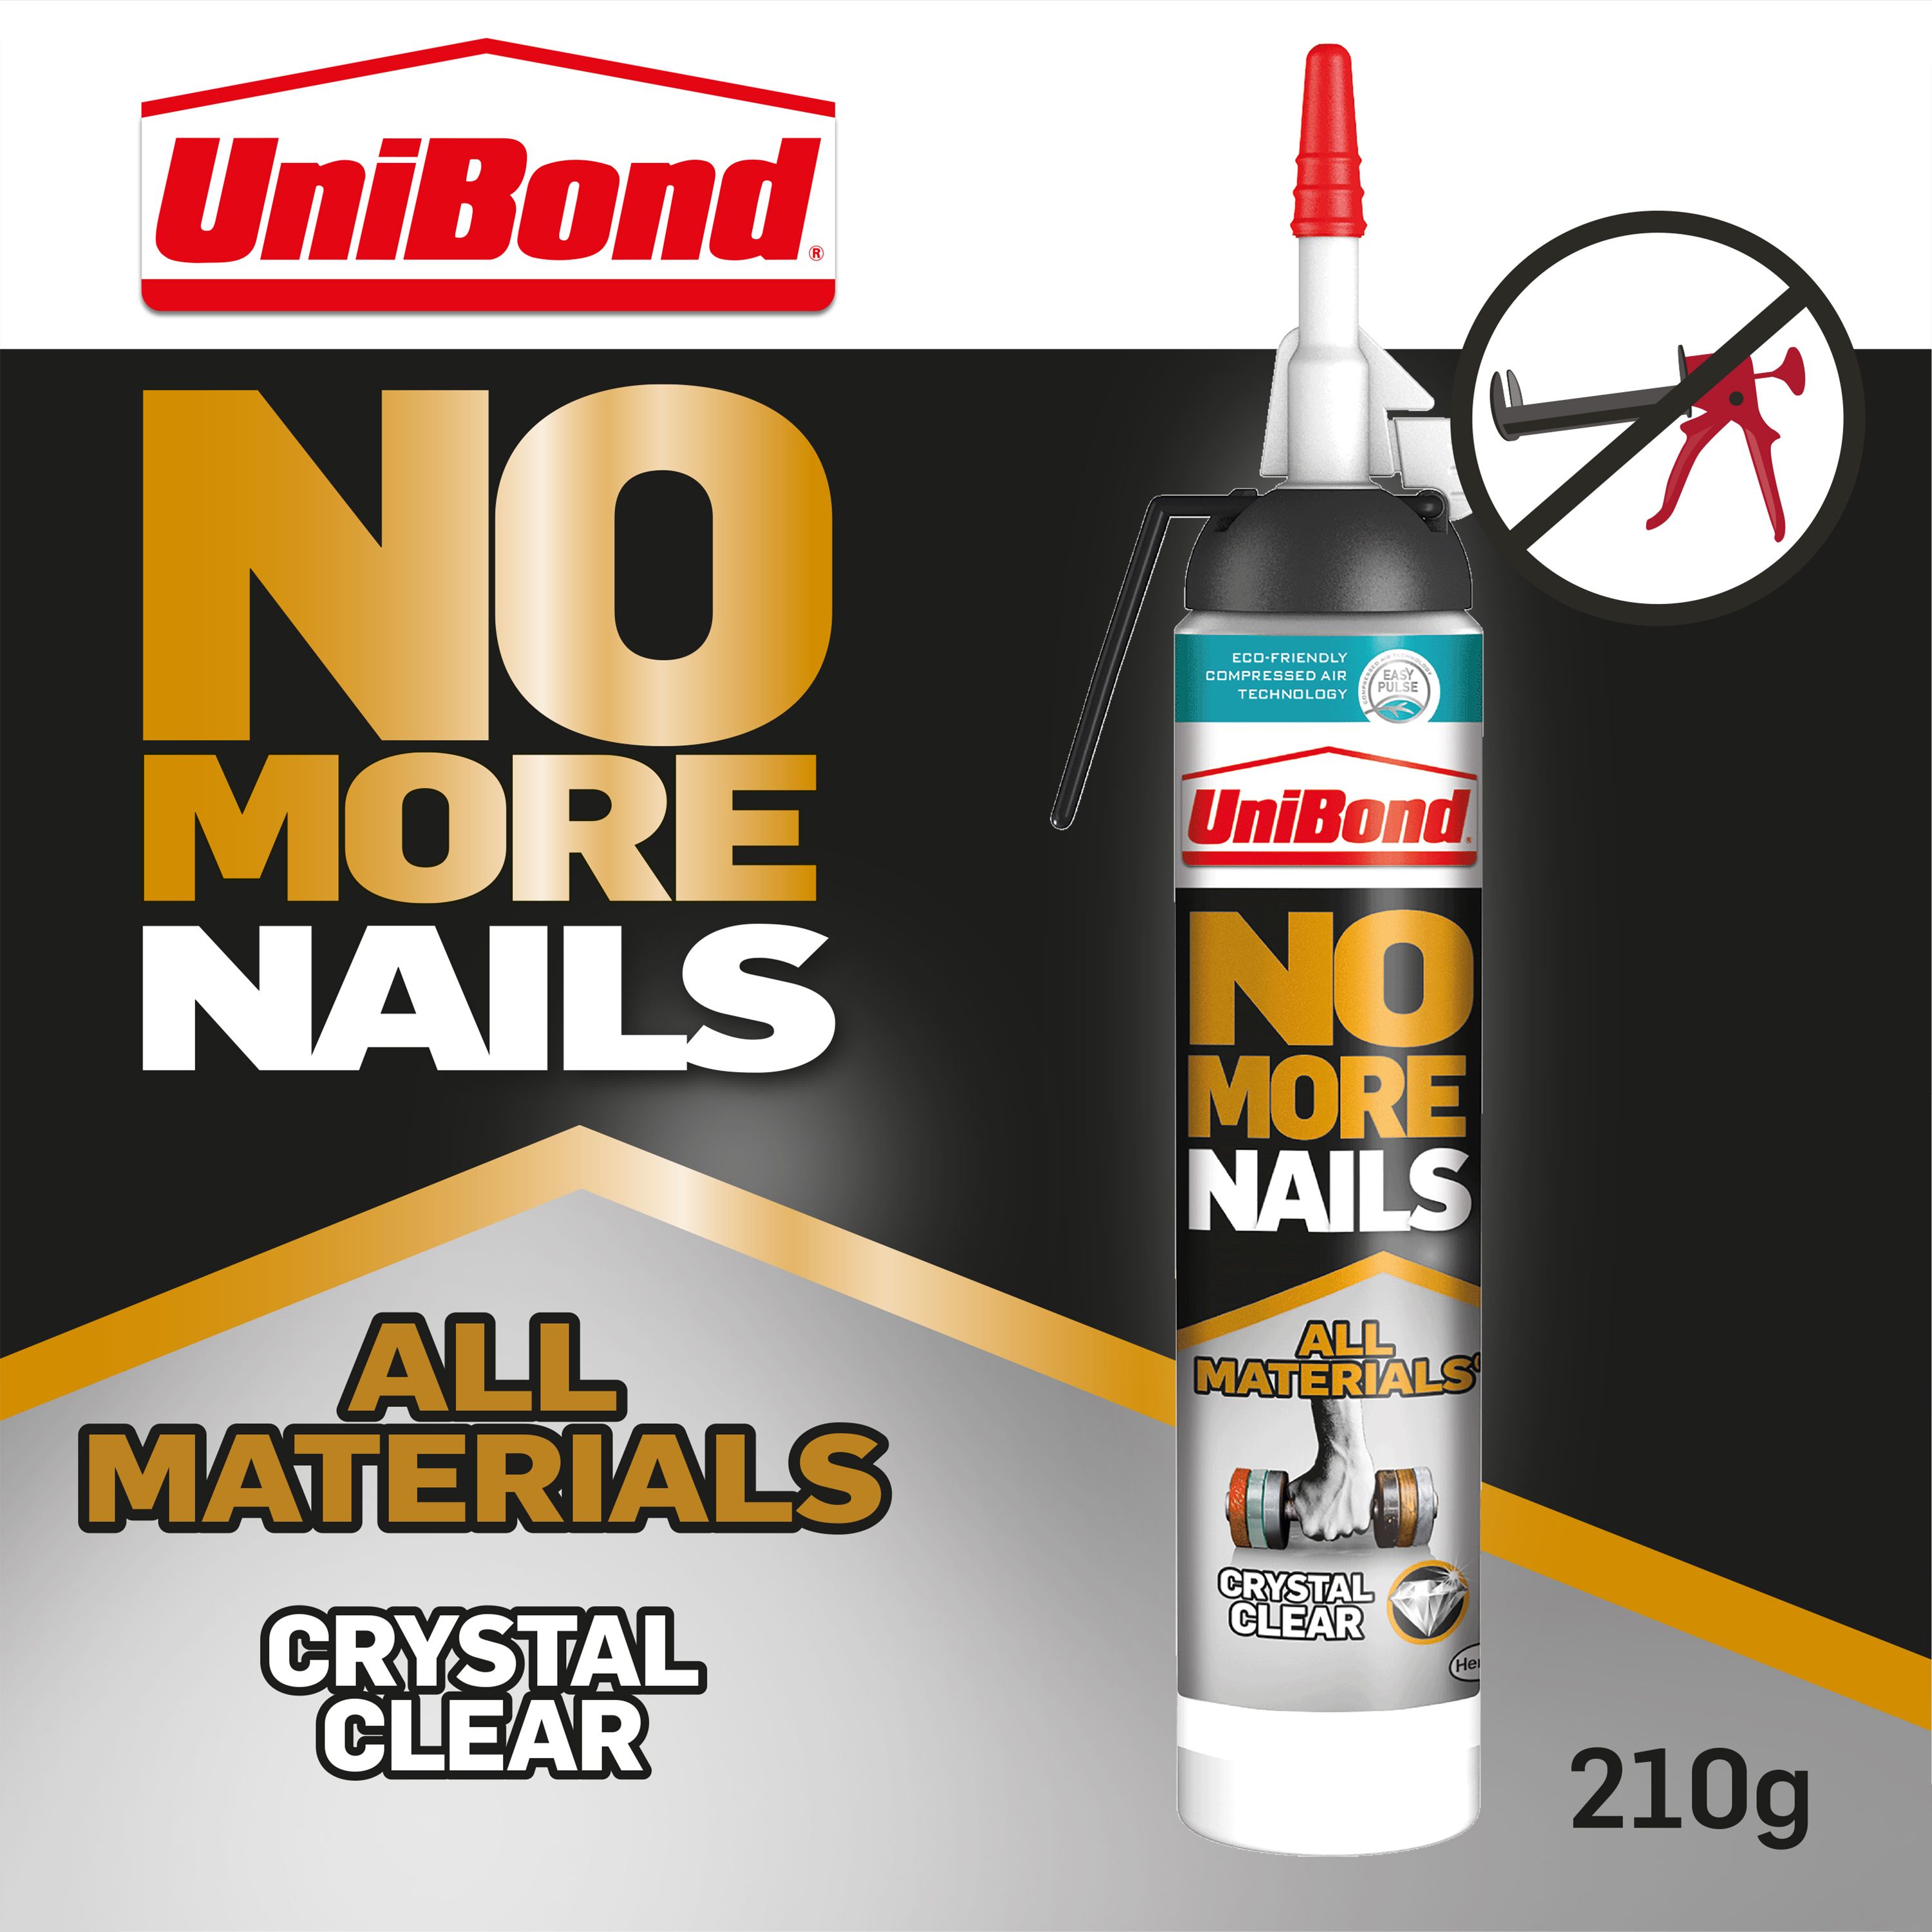 UniBond No More Nails Crystal Clear Solvent-free Clear Grab adhesive 210g